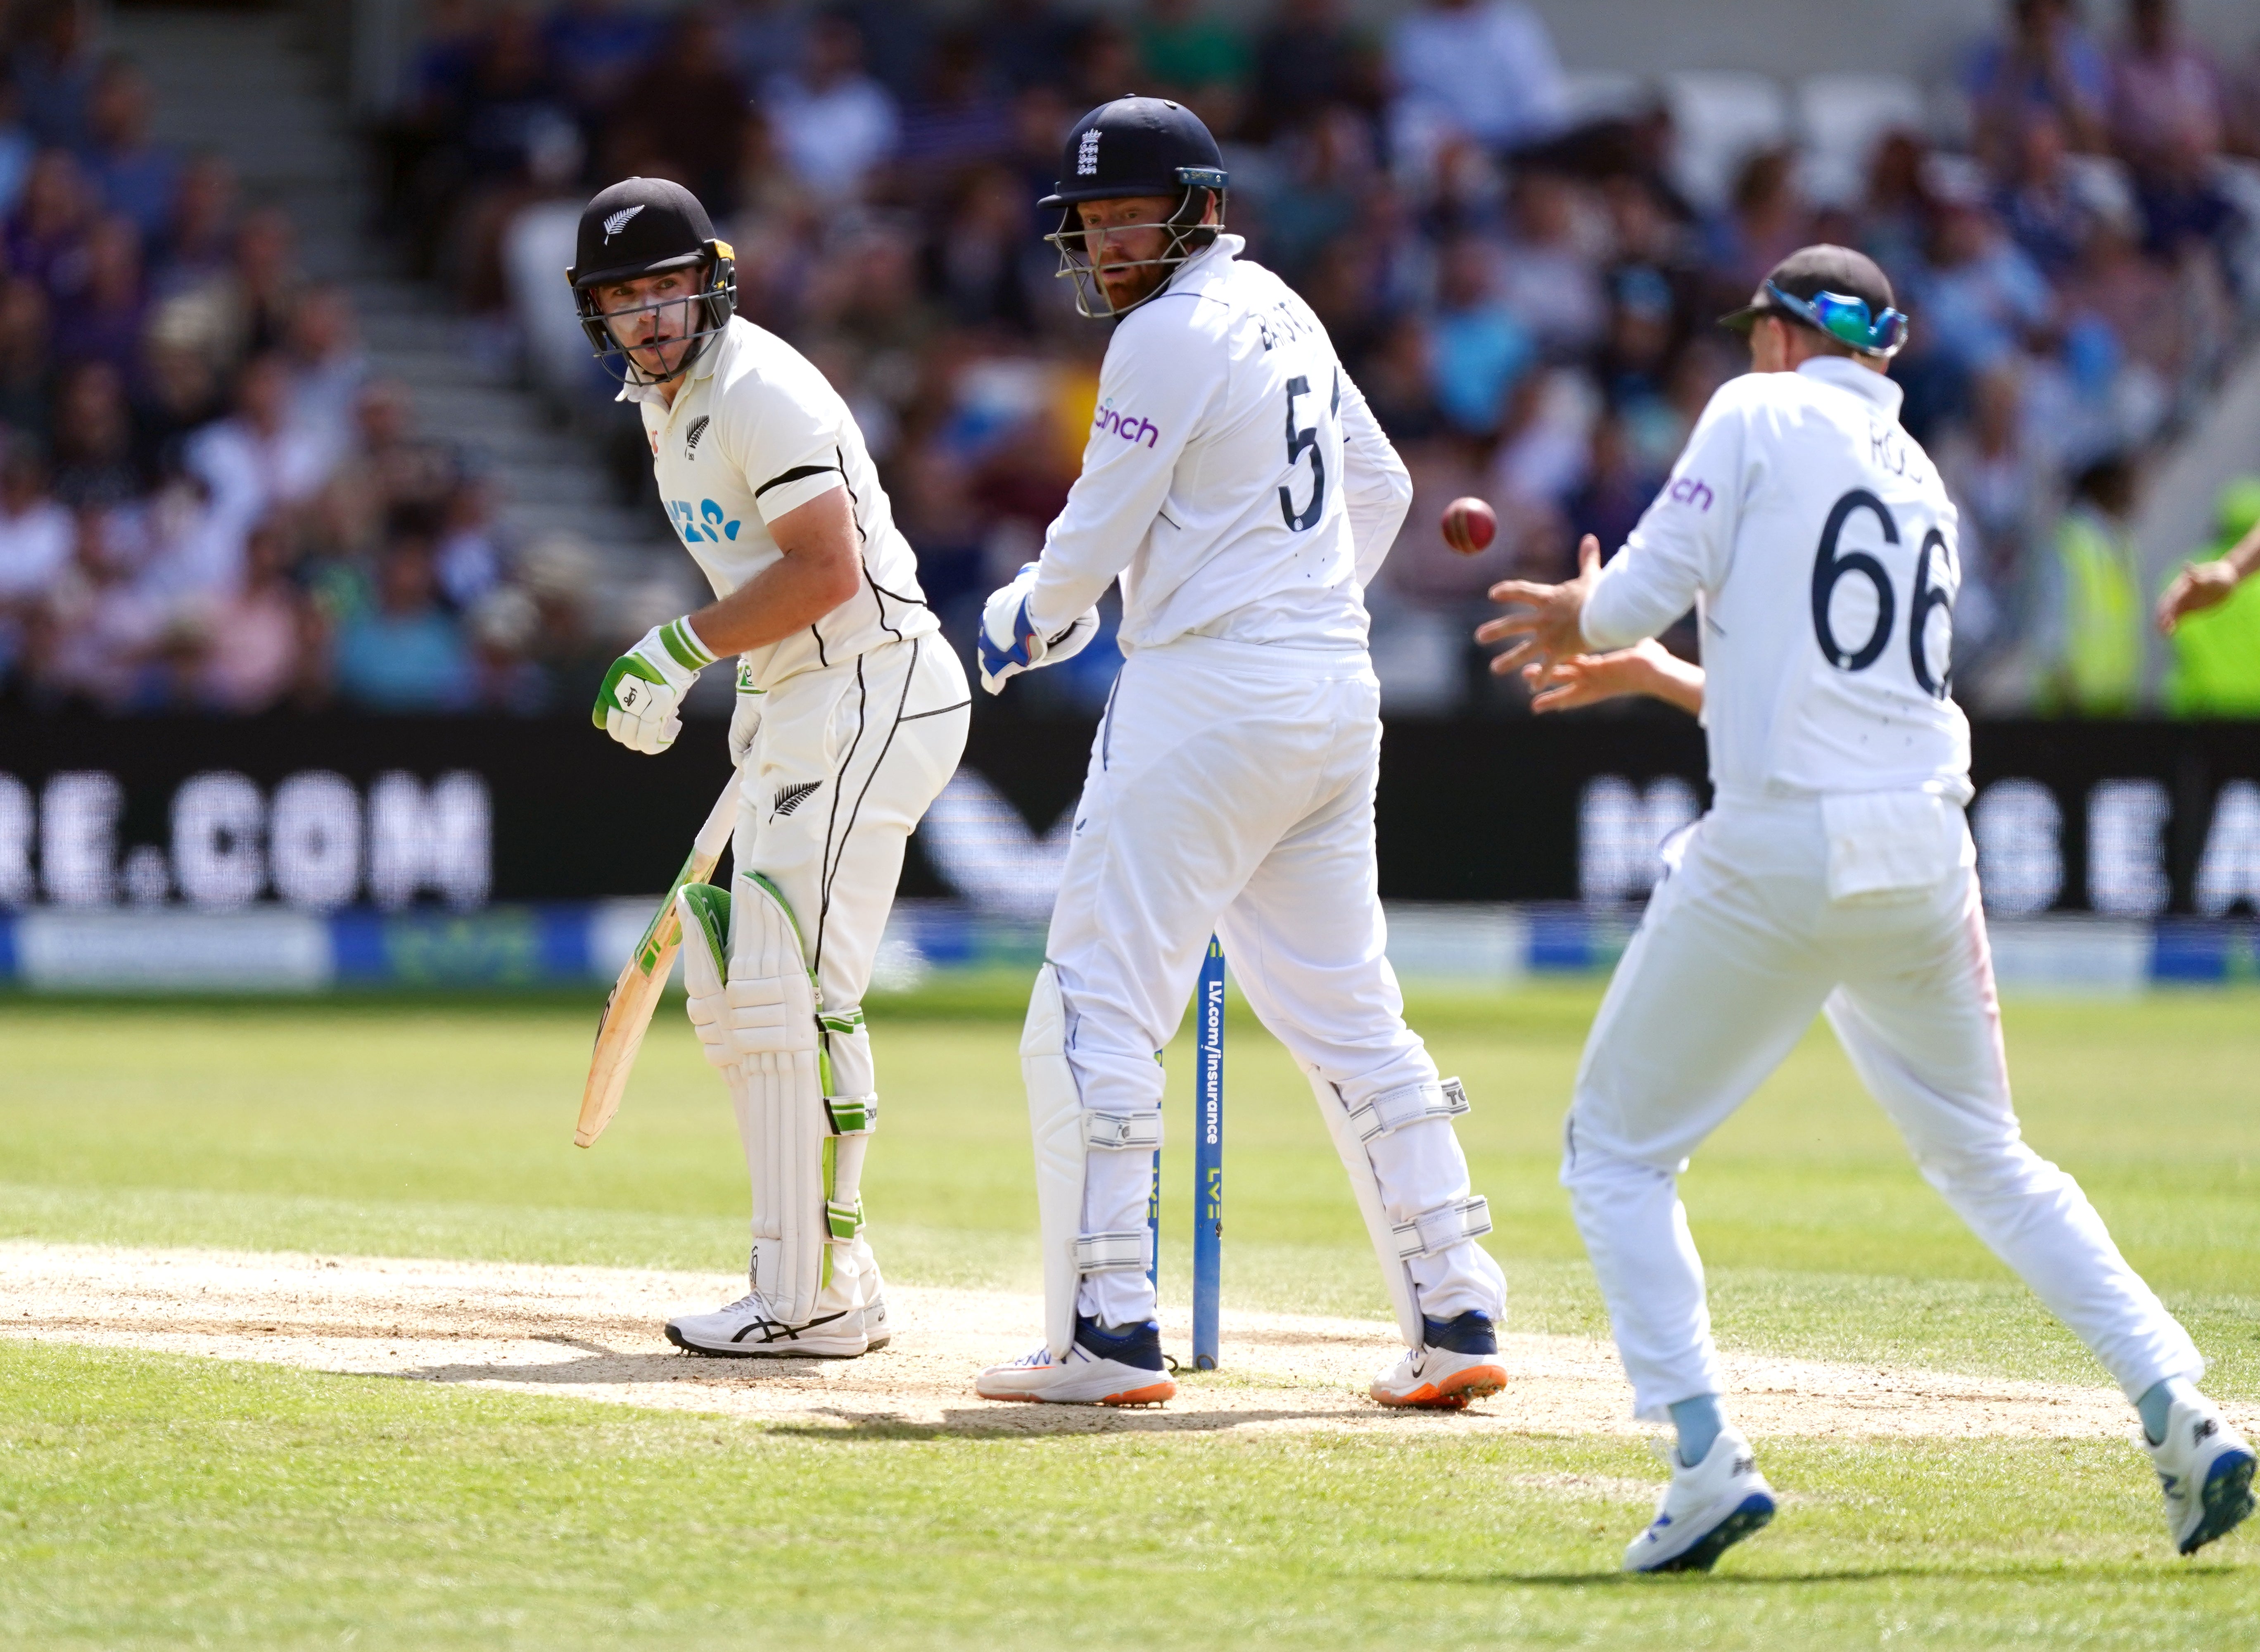 Joe Root squandered a chance to see off Tom Latham (Mike Egerton/PA)